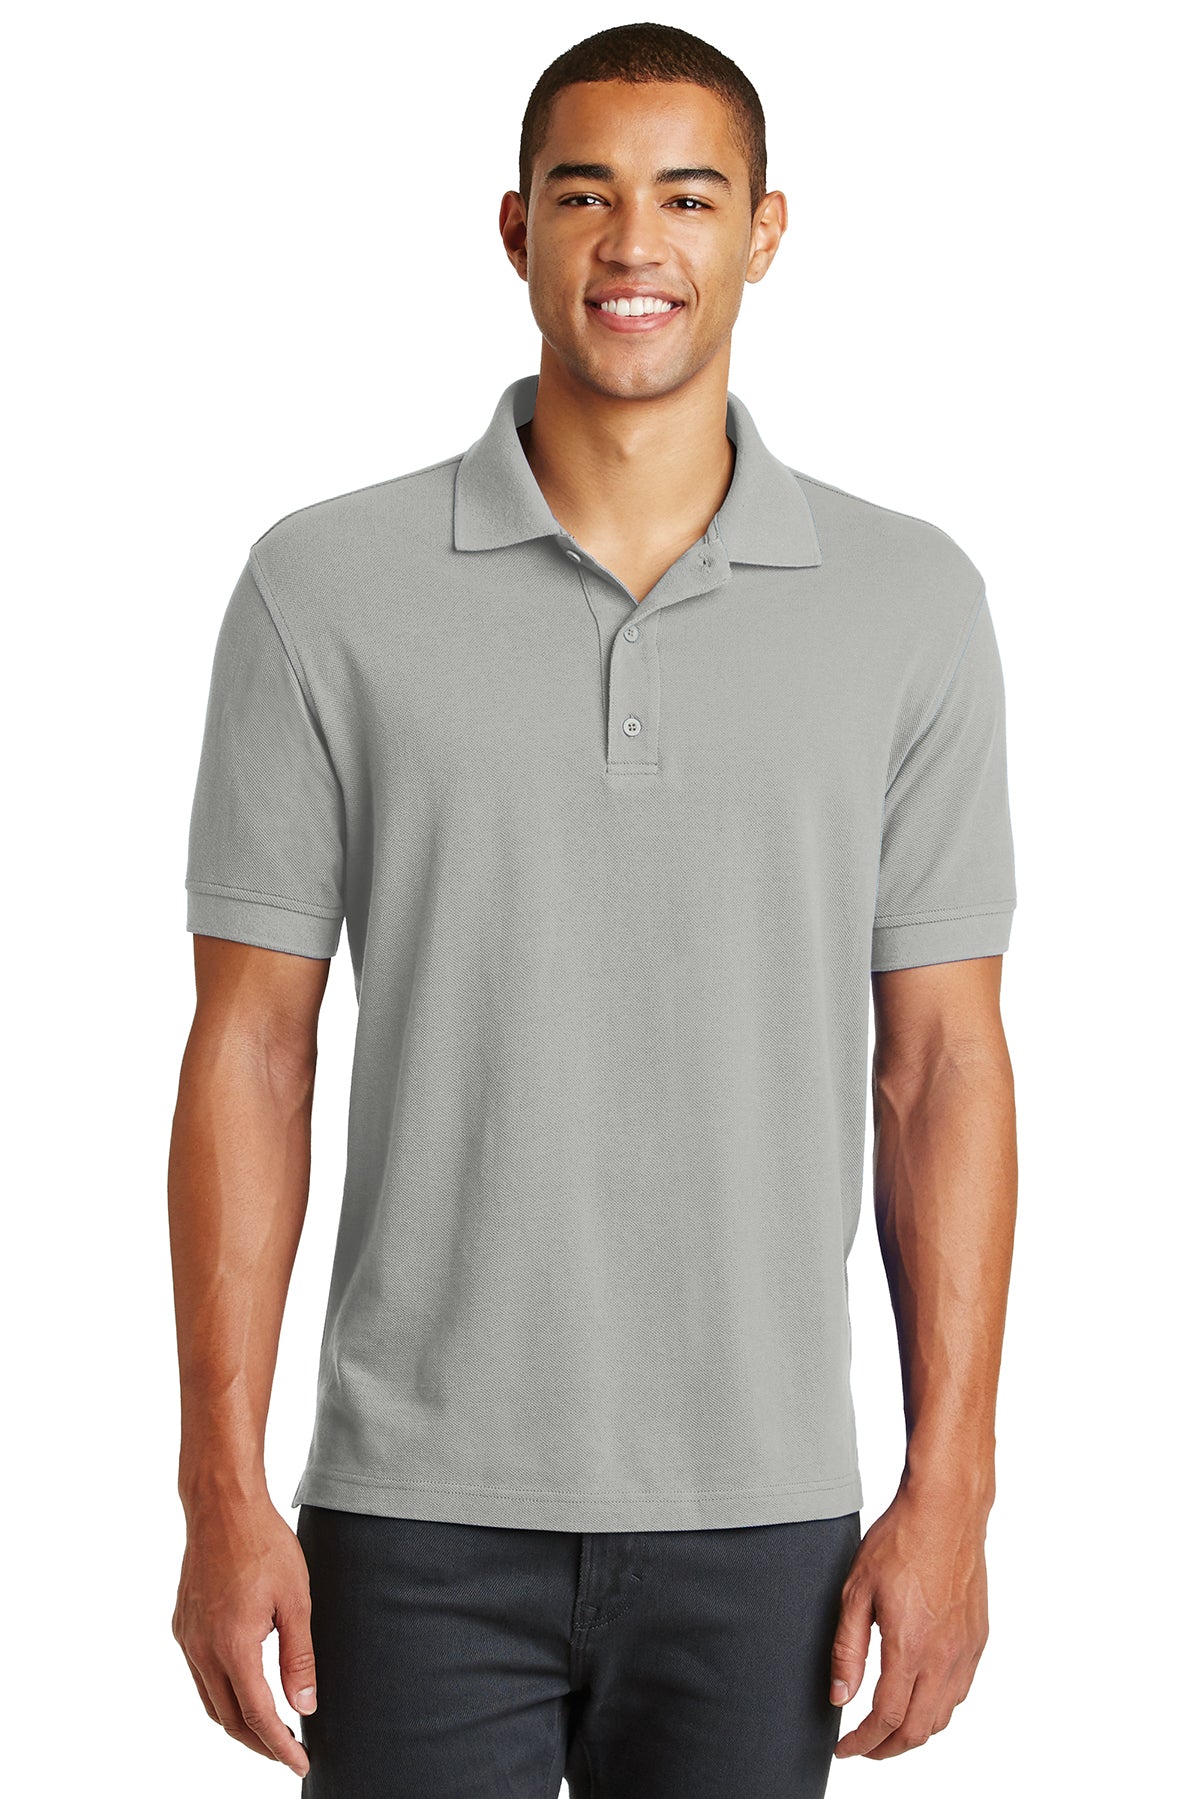 LL Loon Lake Words Only (Embroidered) Eddie Bauer Golf Polo